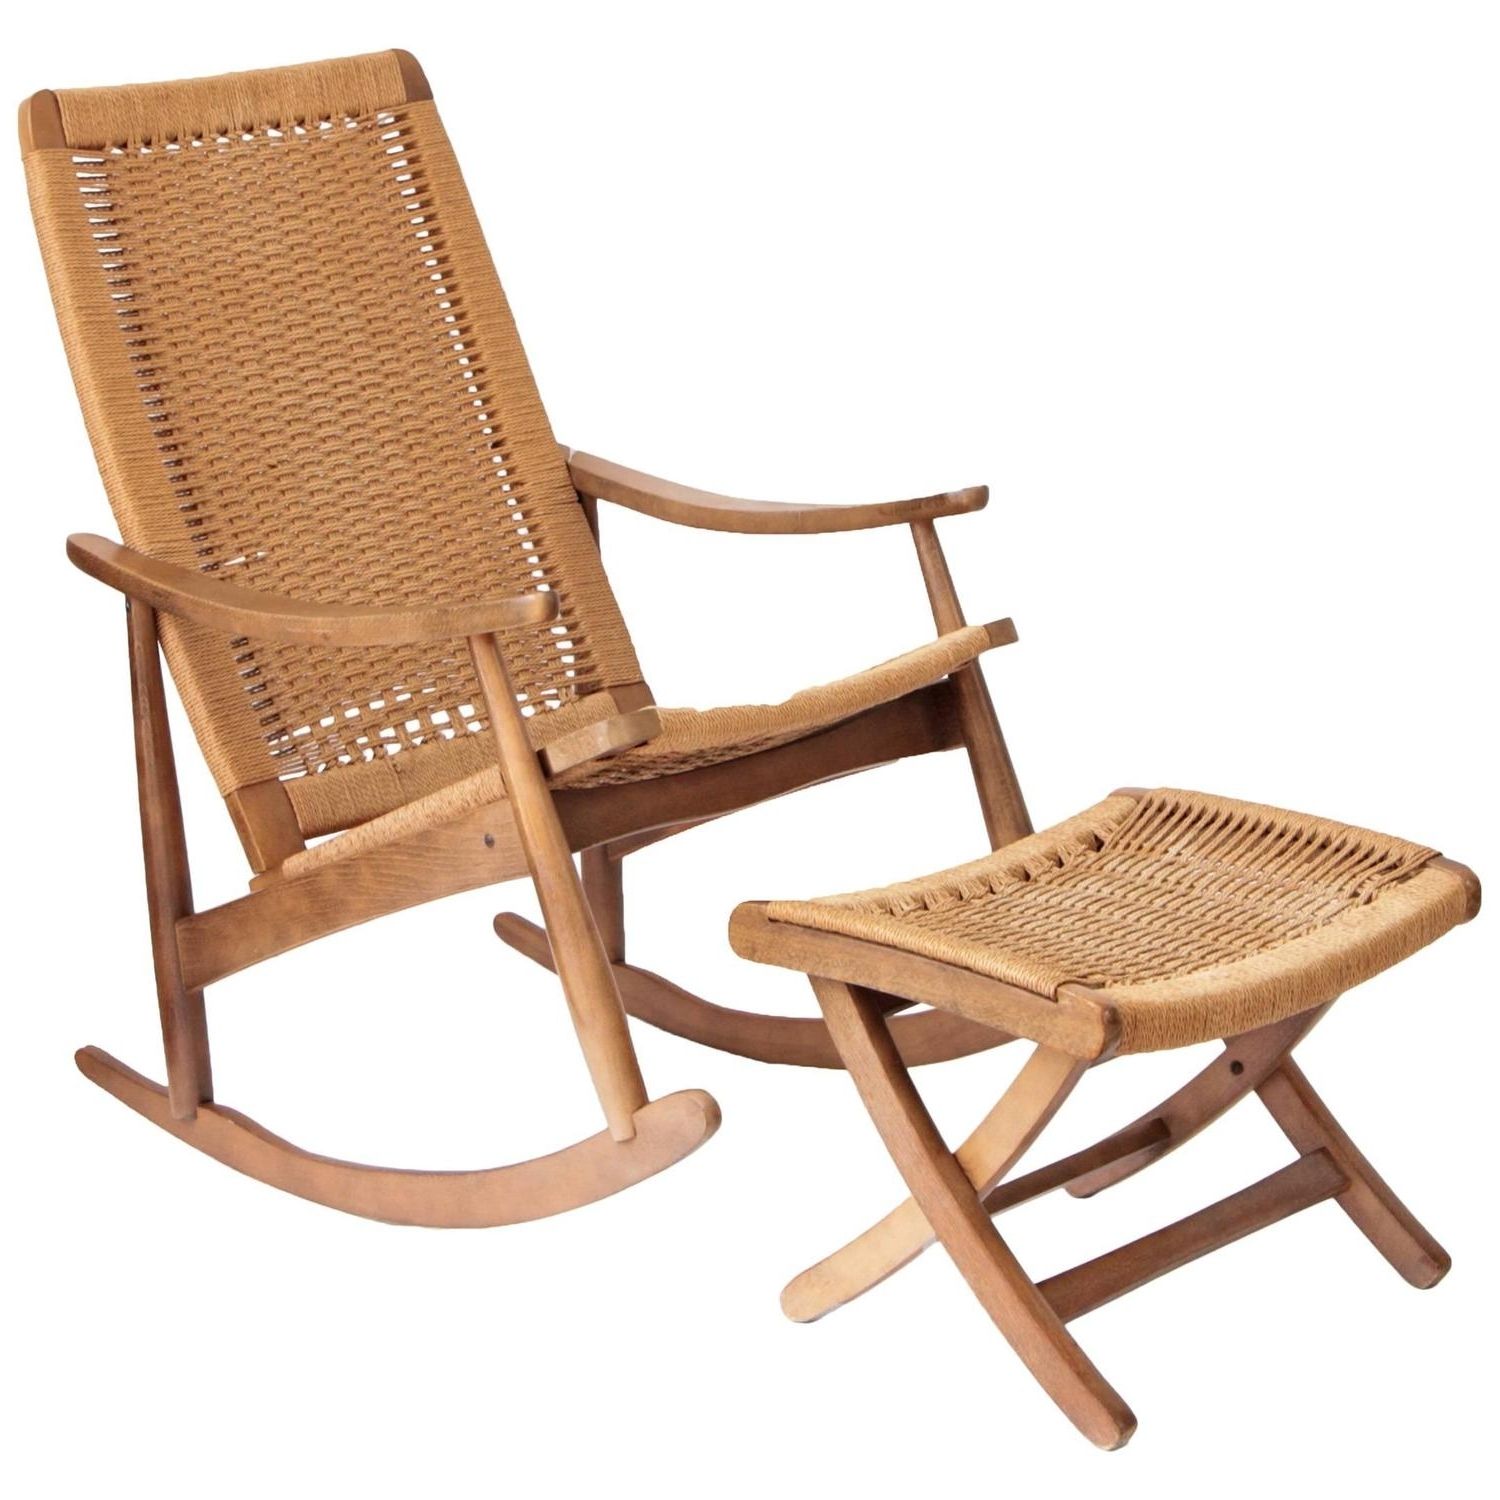 2017 Patio Rocking Chairs With Ottoman With Regard To Woven Rope Mid Century Modern Rocking Chair And Ottoman At 1stdibs (View 2 of 15)